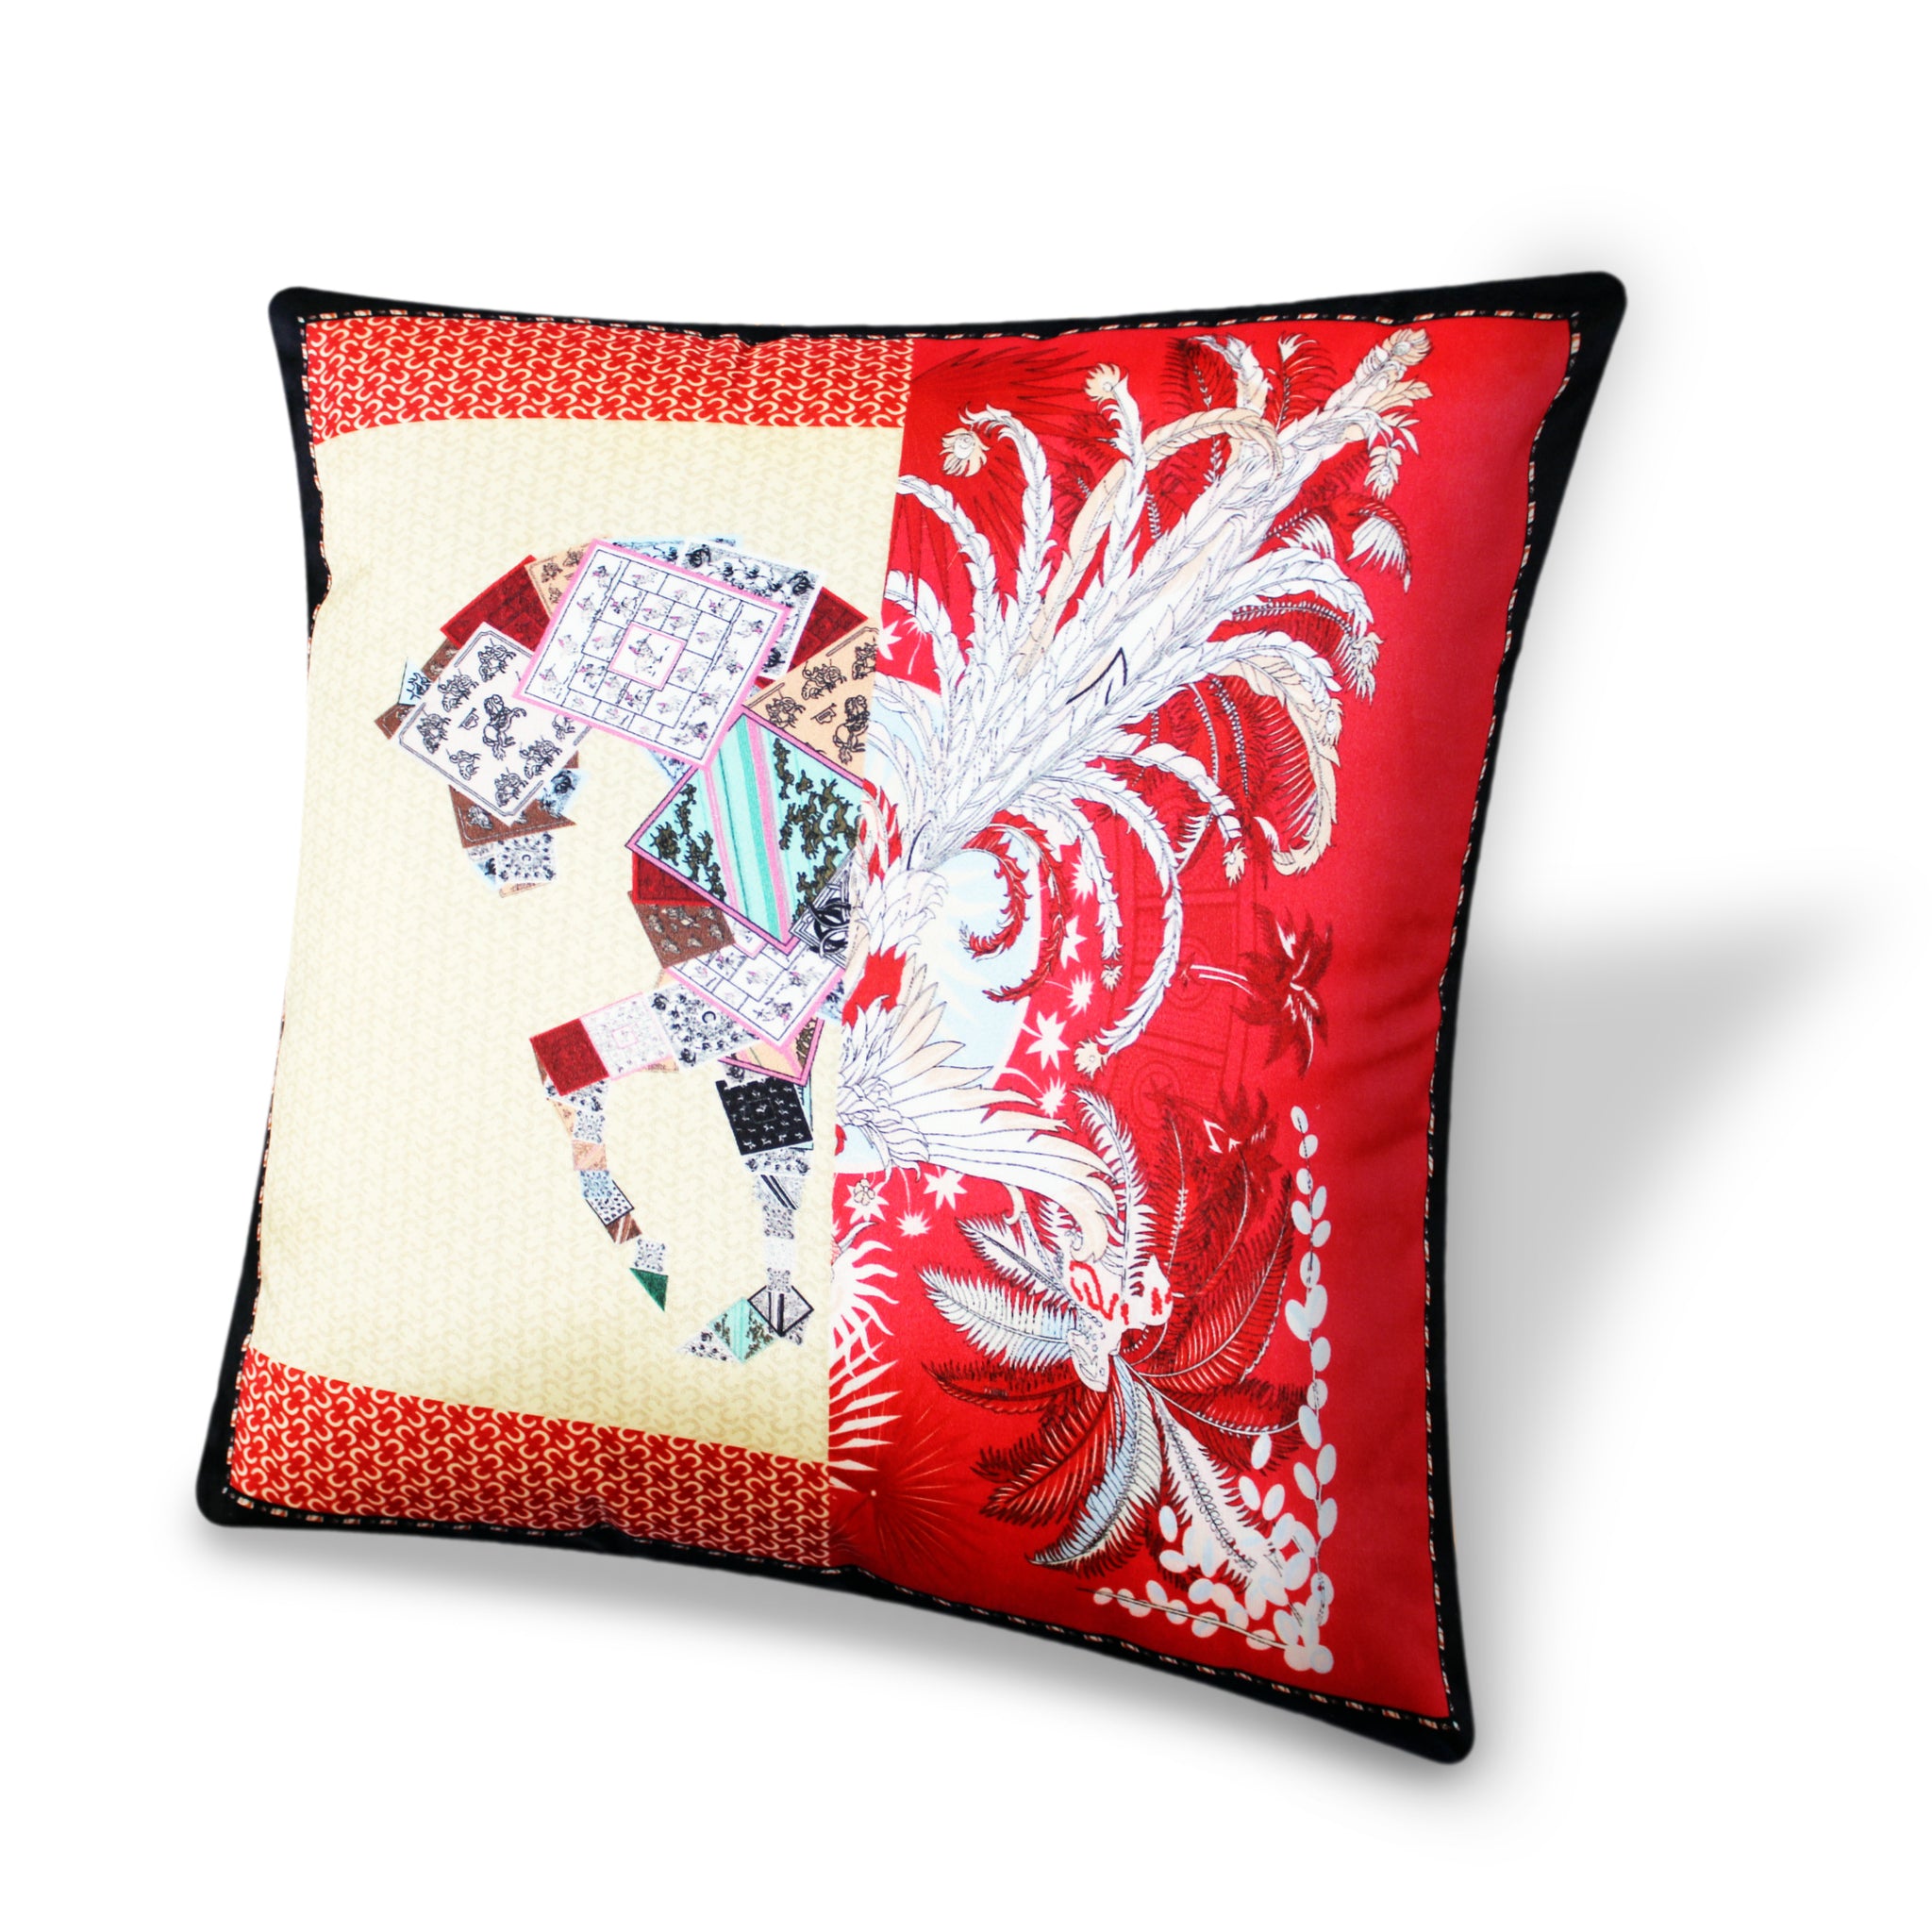 Red Velvet Cushion Cover, Hermes Inspired Horse Printed Decorative Pillow, Vintage Home Décor Throw Pillow Cover,  45 x 45 CM